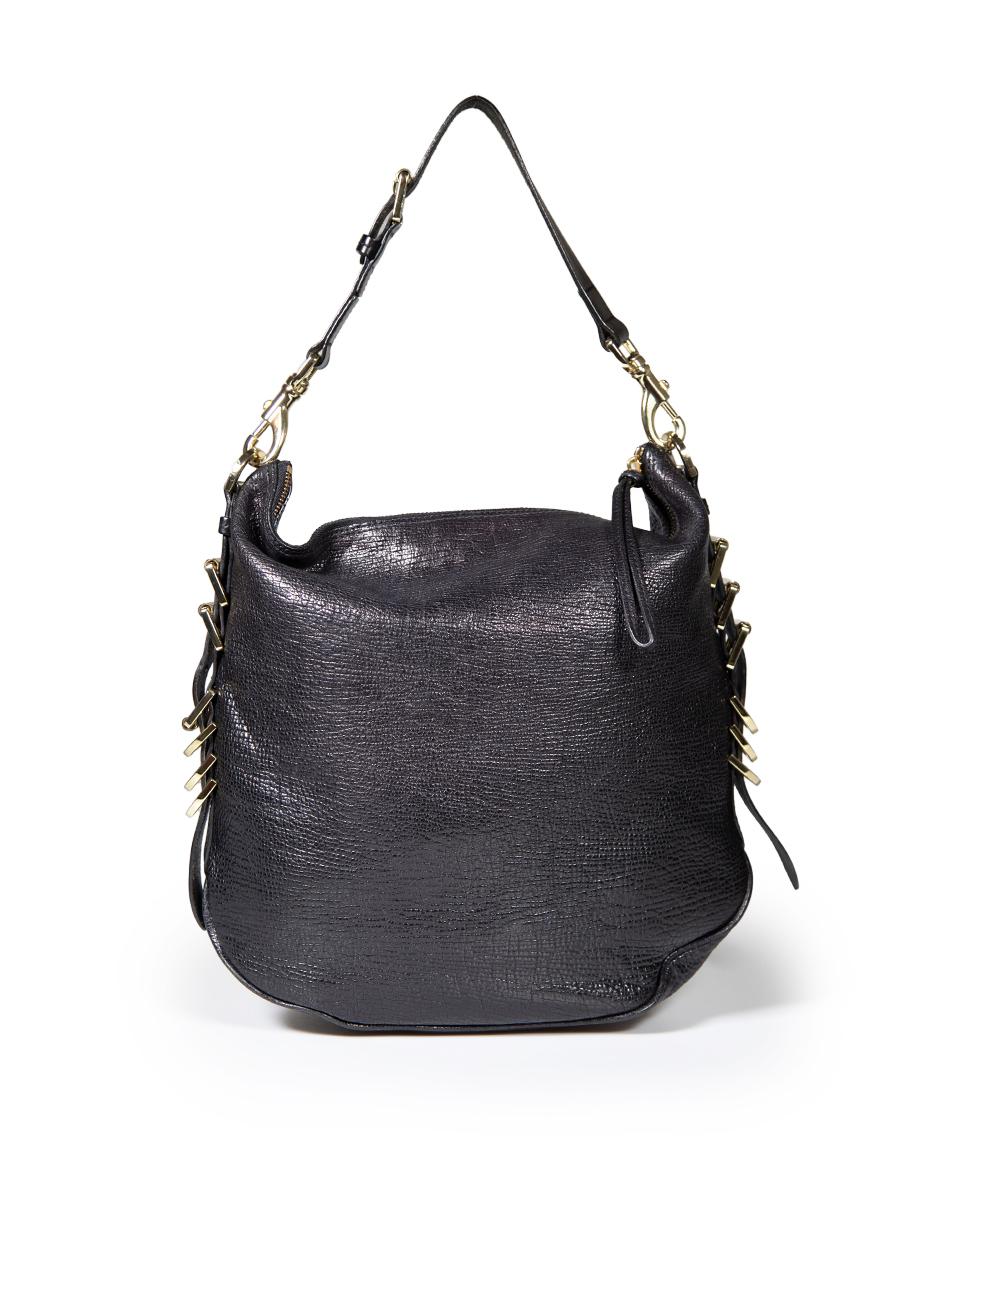 Mulberry Black Leather Mila Hobo In Good Condition For Sale In London, GB